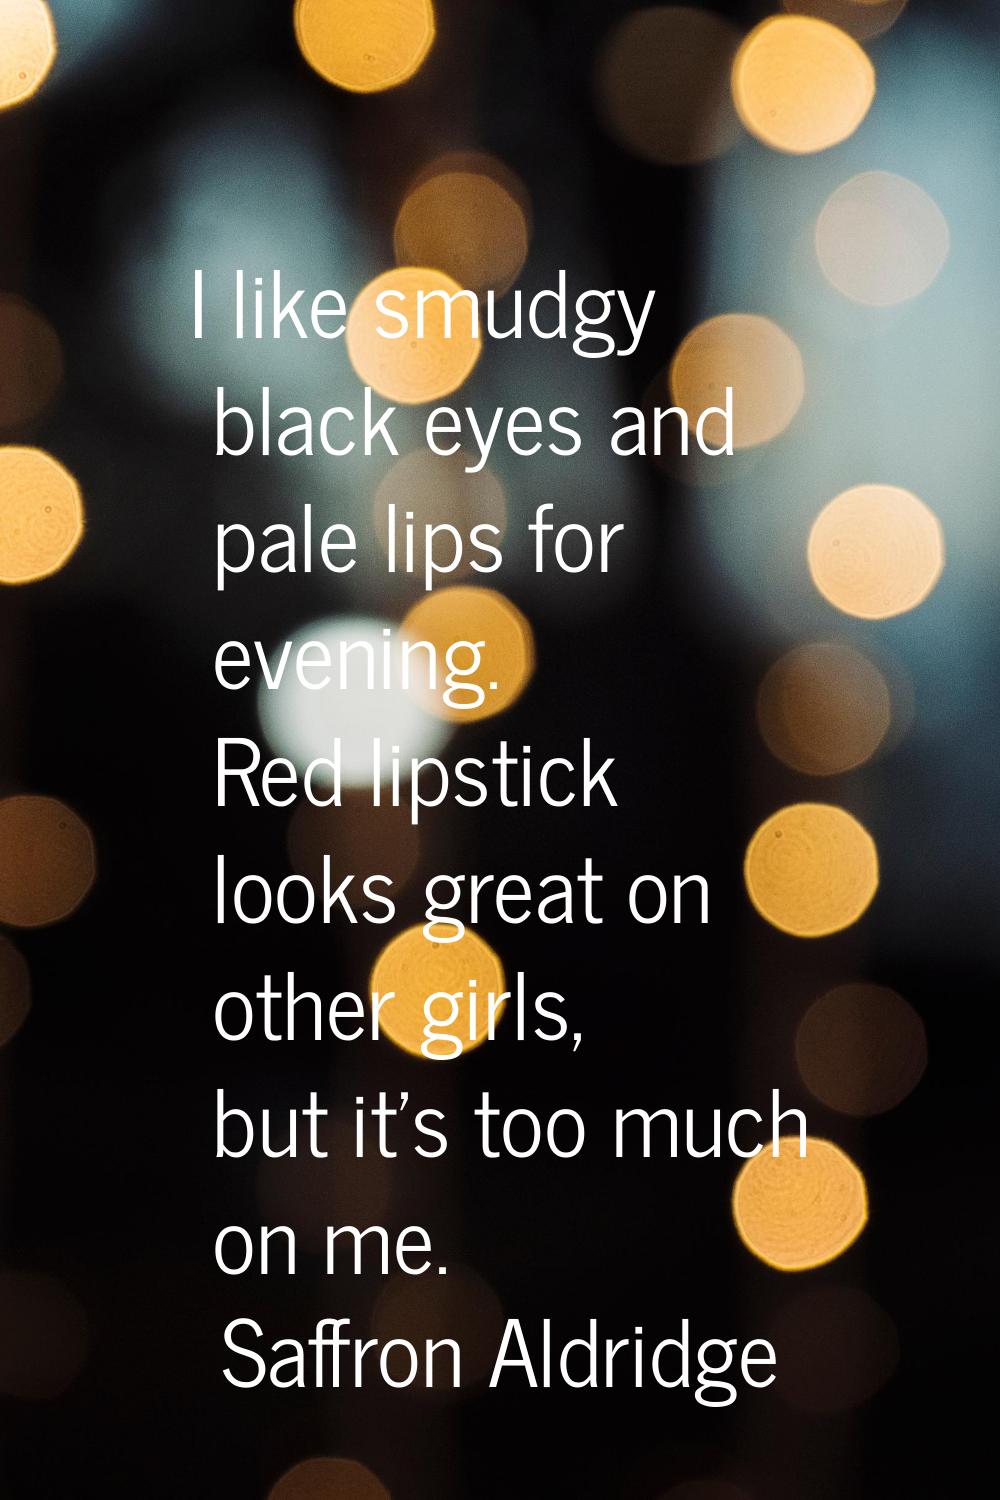 I like smudgy black eyes and pale lips for evening. Red lipstick looks great on other girls, but it